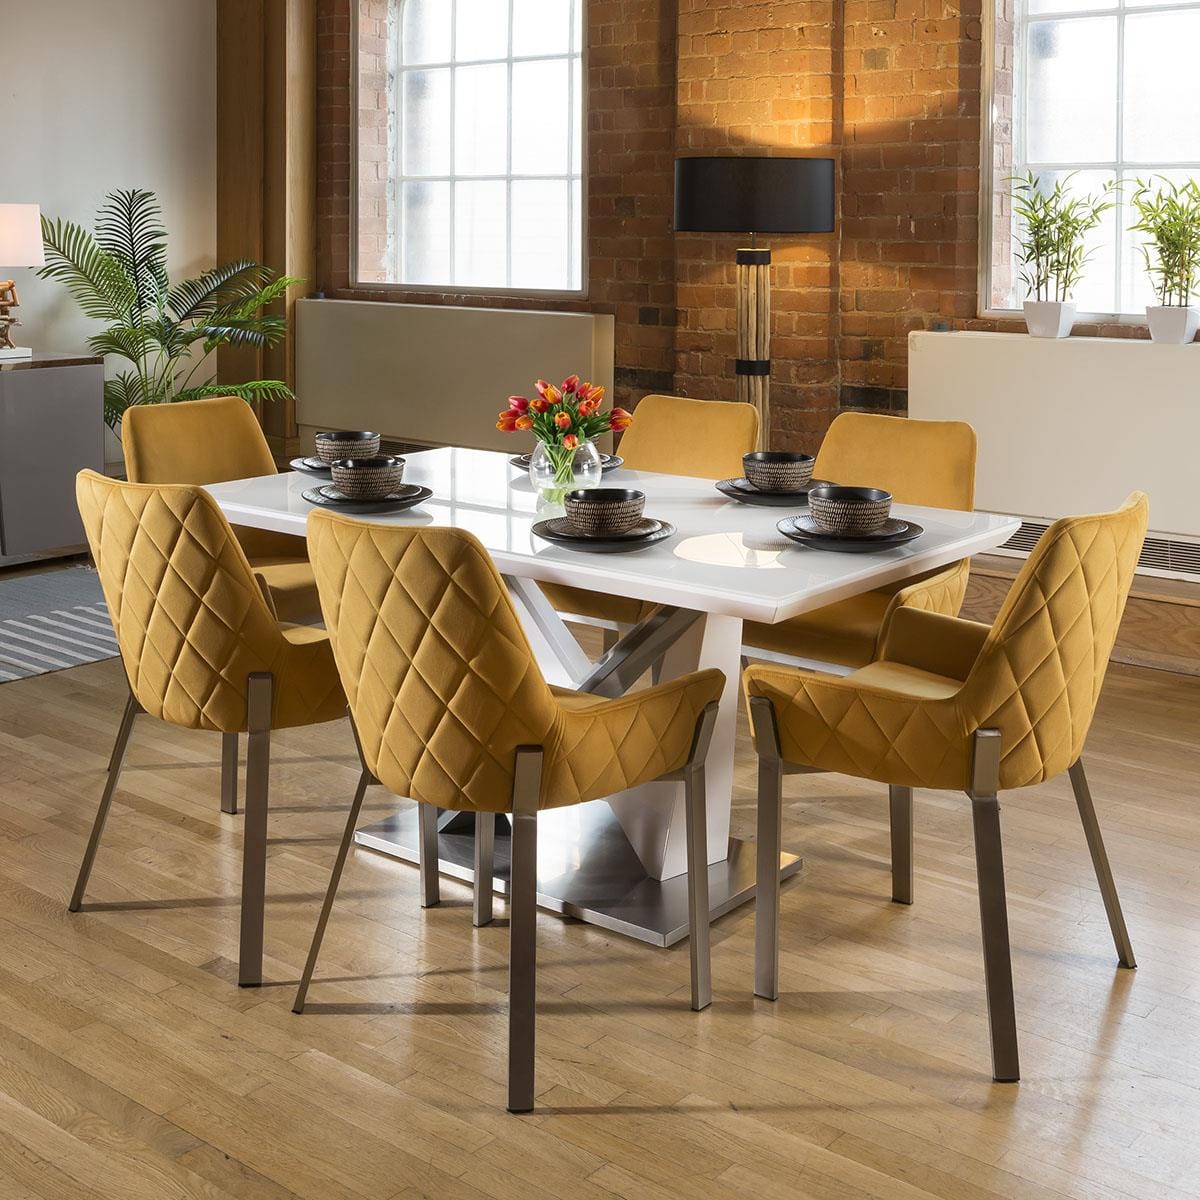 Quatropi Stunning 6 Seater Dining Set White / Glass Table With 6 Mustard Chairs